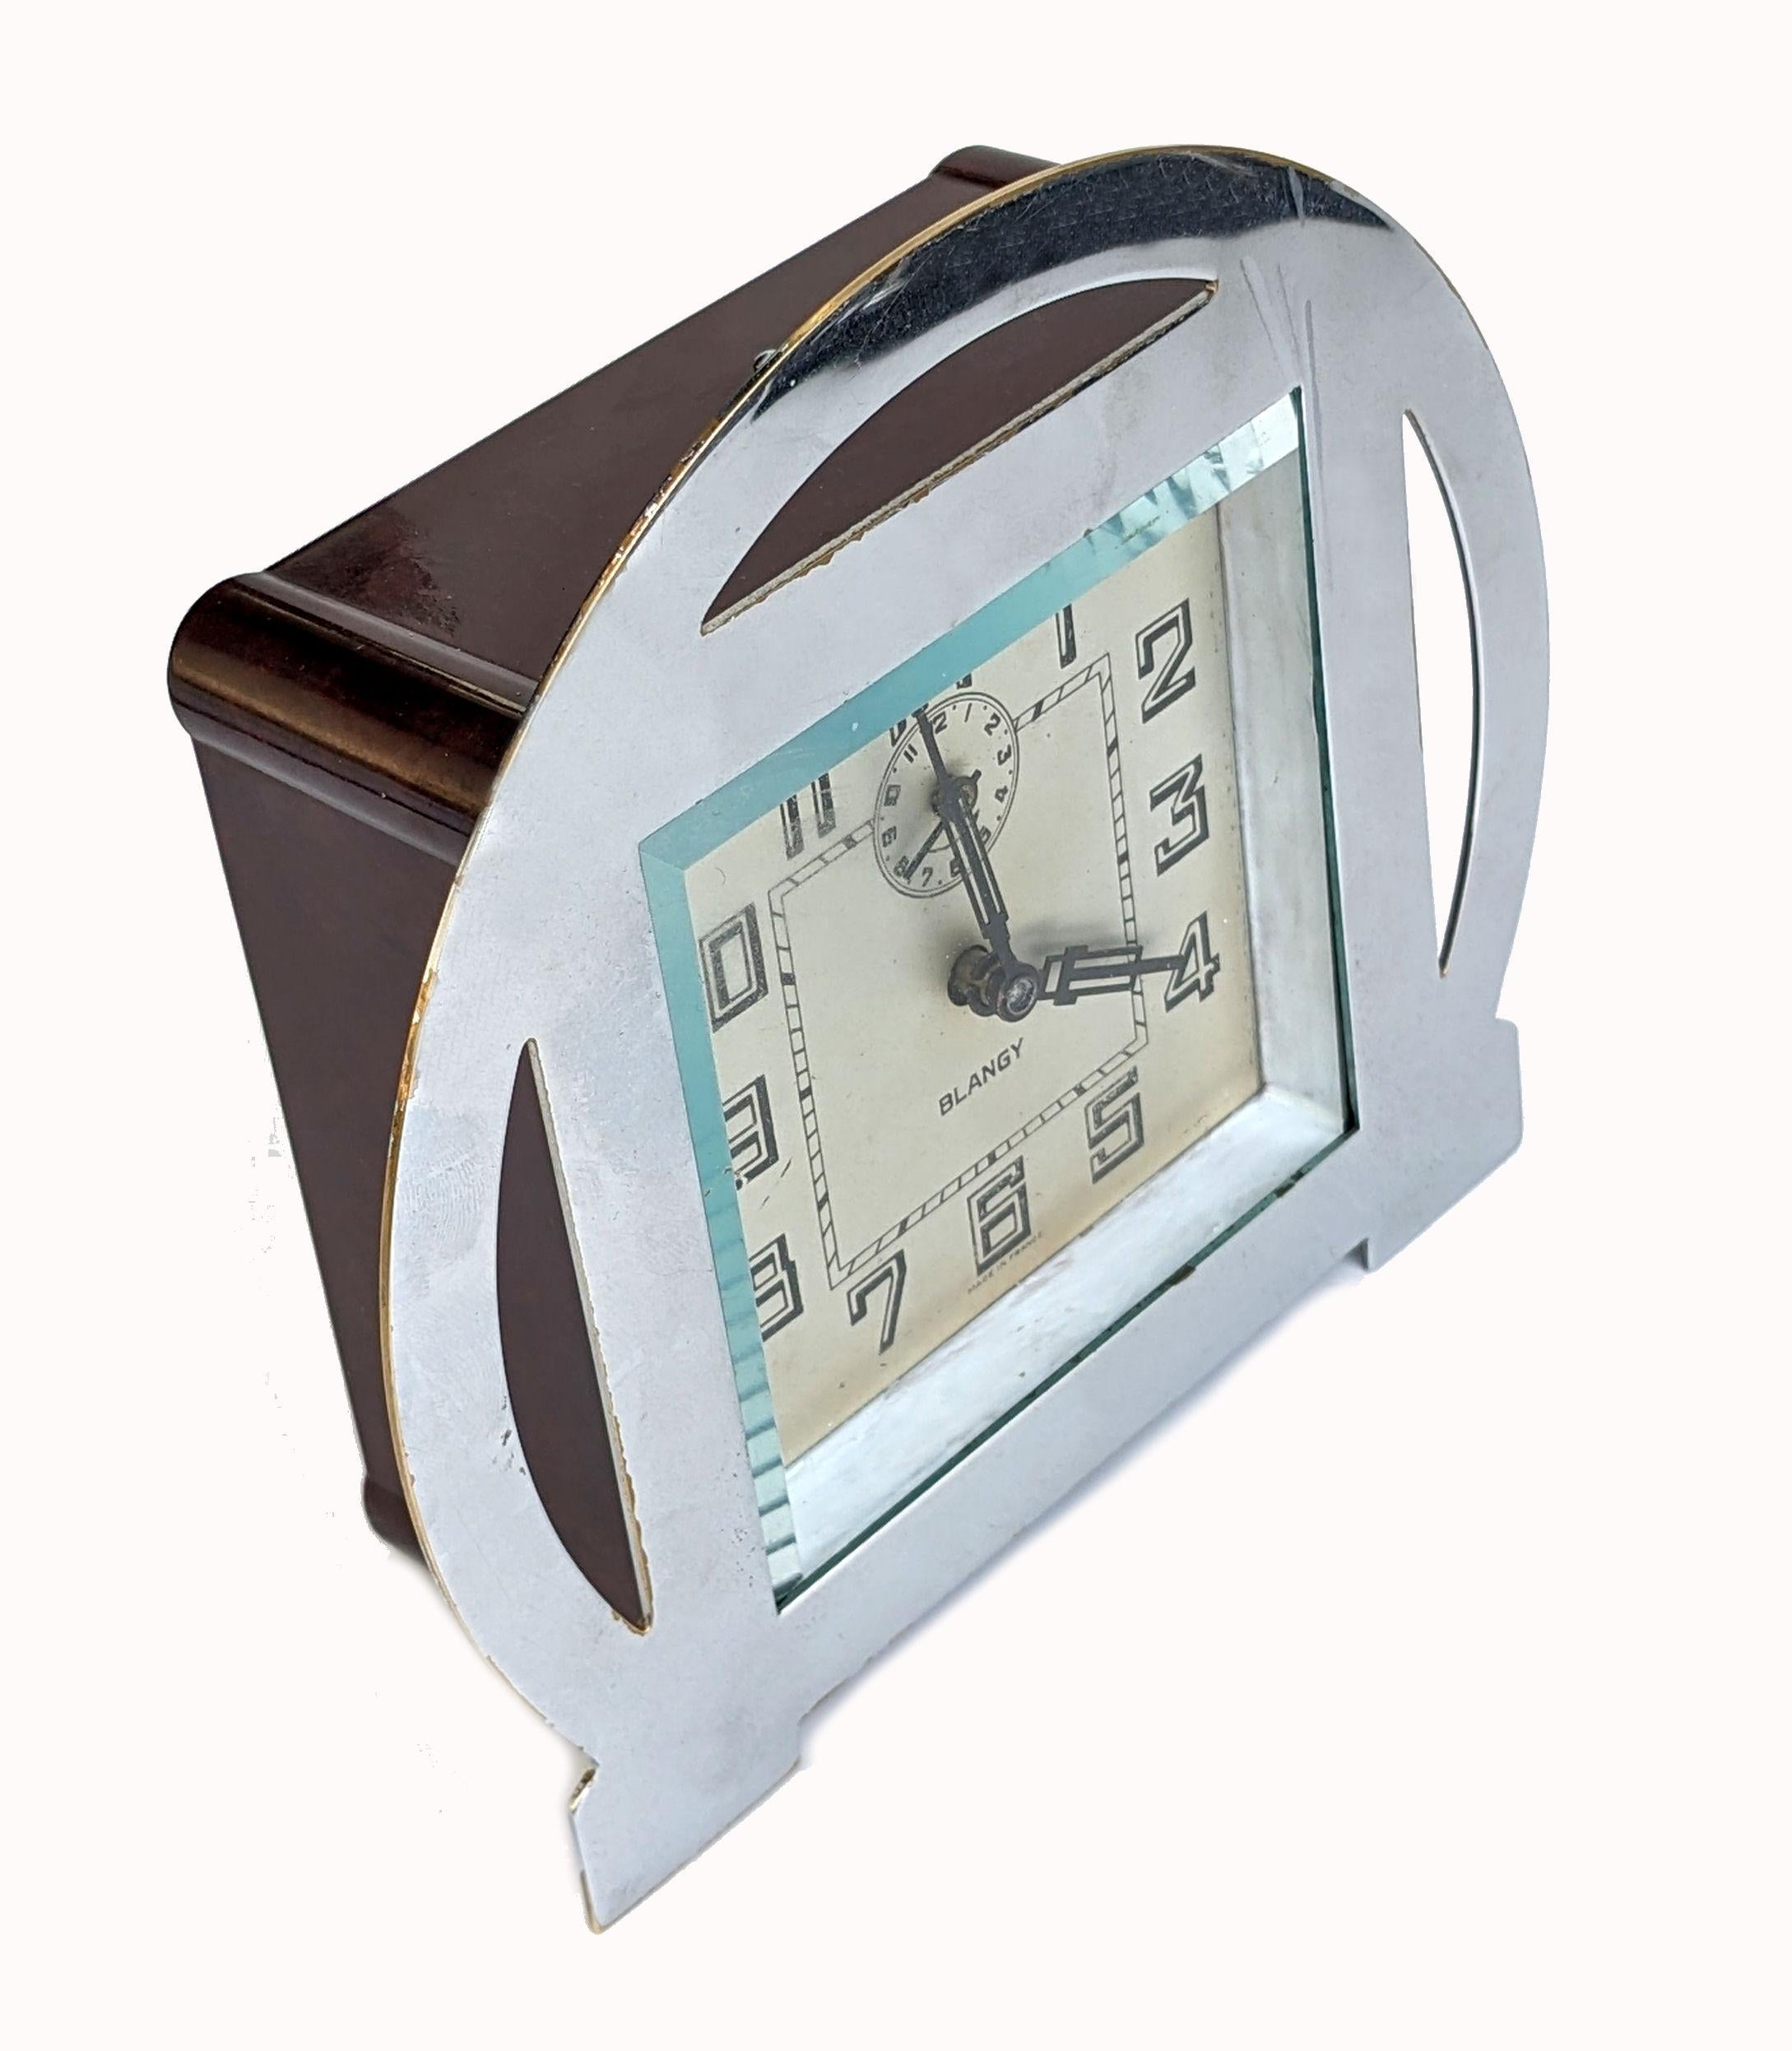 One of our personal favourite style of Art Deco clocks are these Blangy French table clocks. The stylized numerals for any Art Deco enthusiast are an absolute delight. Superb 1930s Art Deco clock by the French clock company Blangy. All chrome case